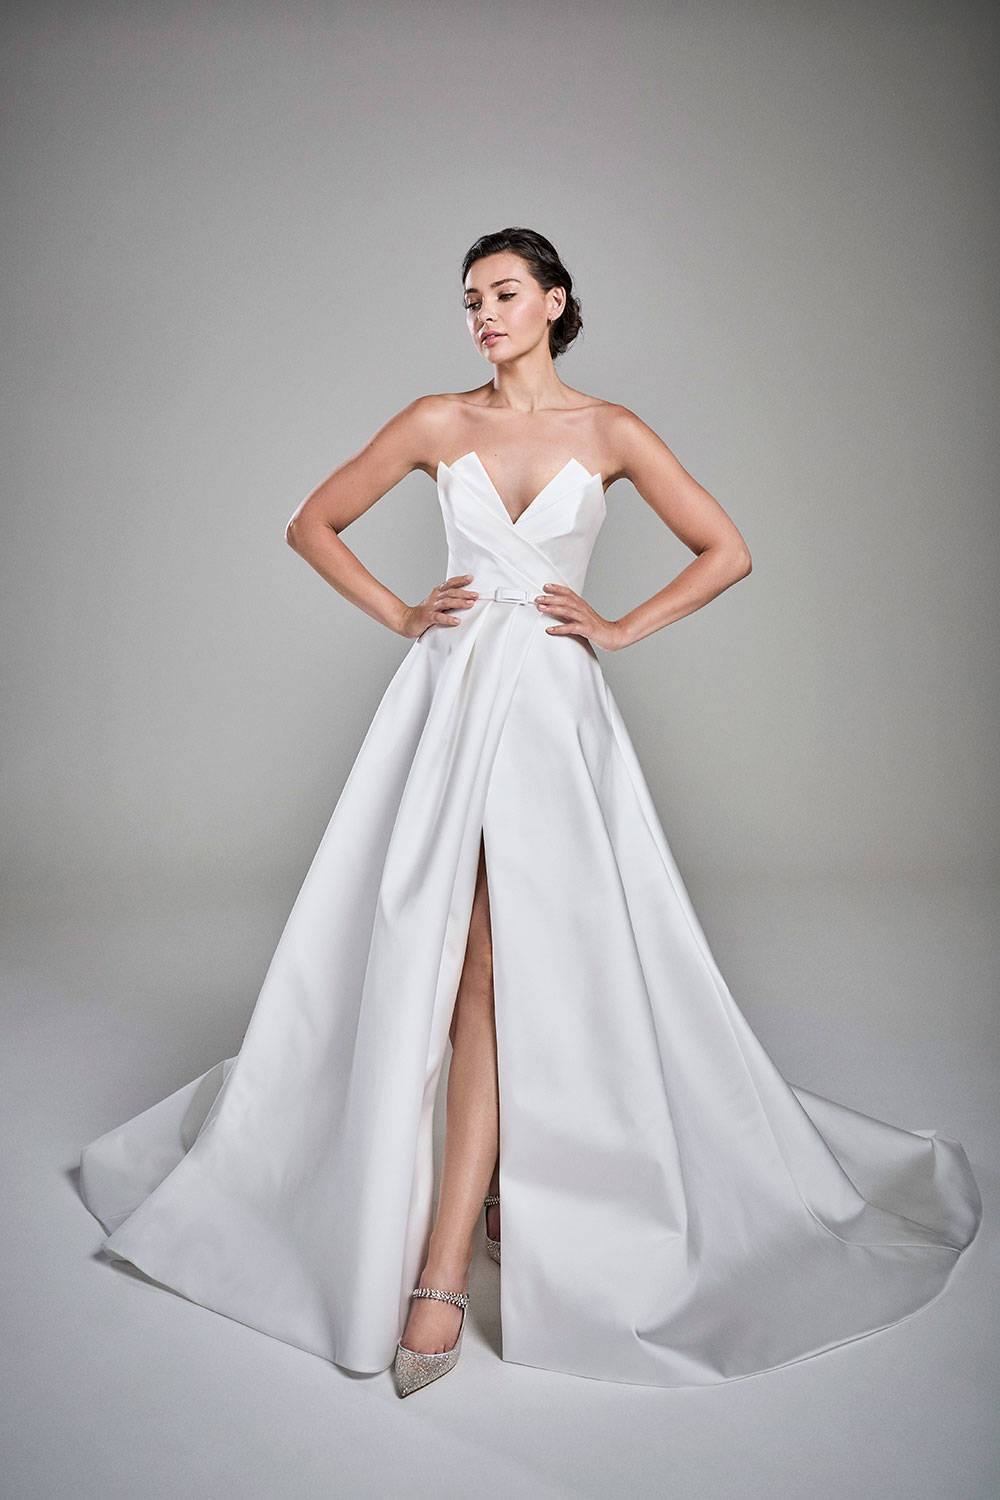 10 Stunning Wedding Gowns for an Outdoor Wedding Venue Image